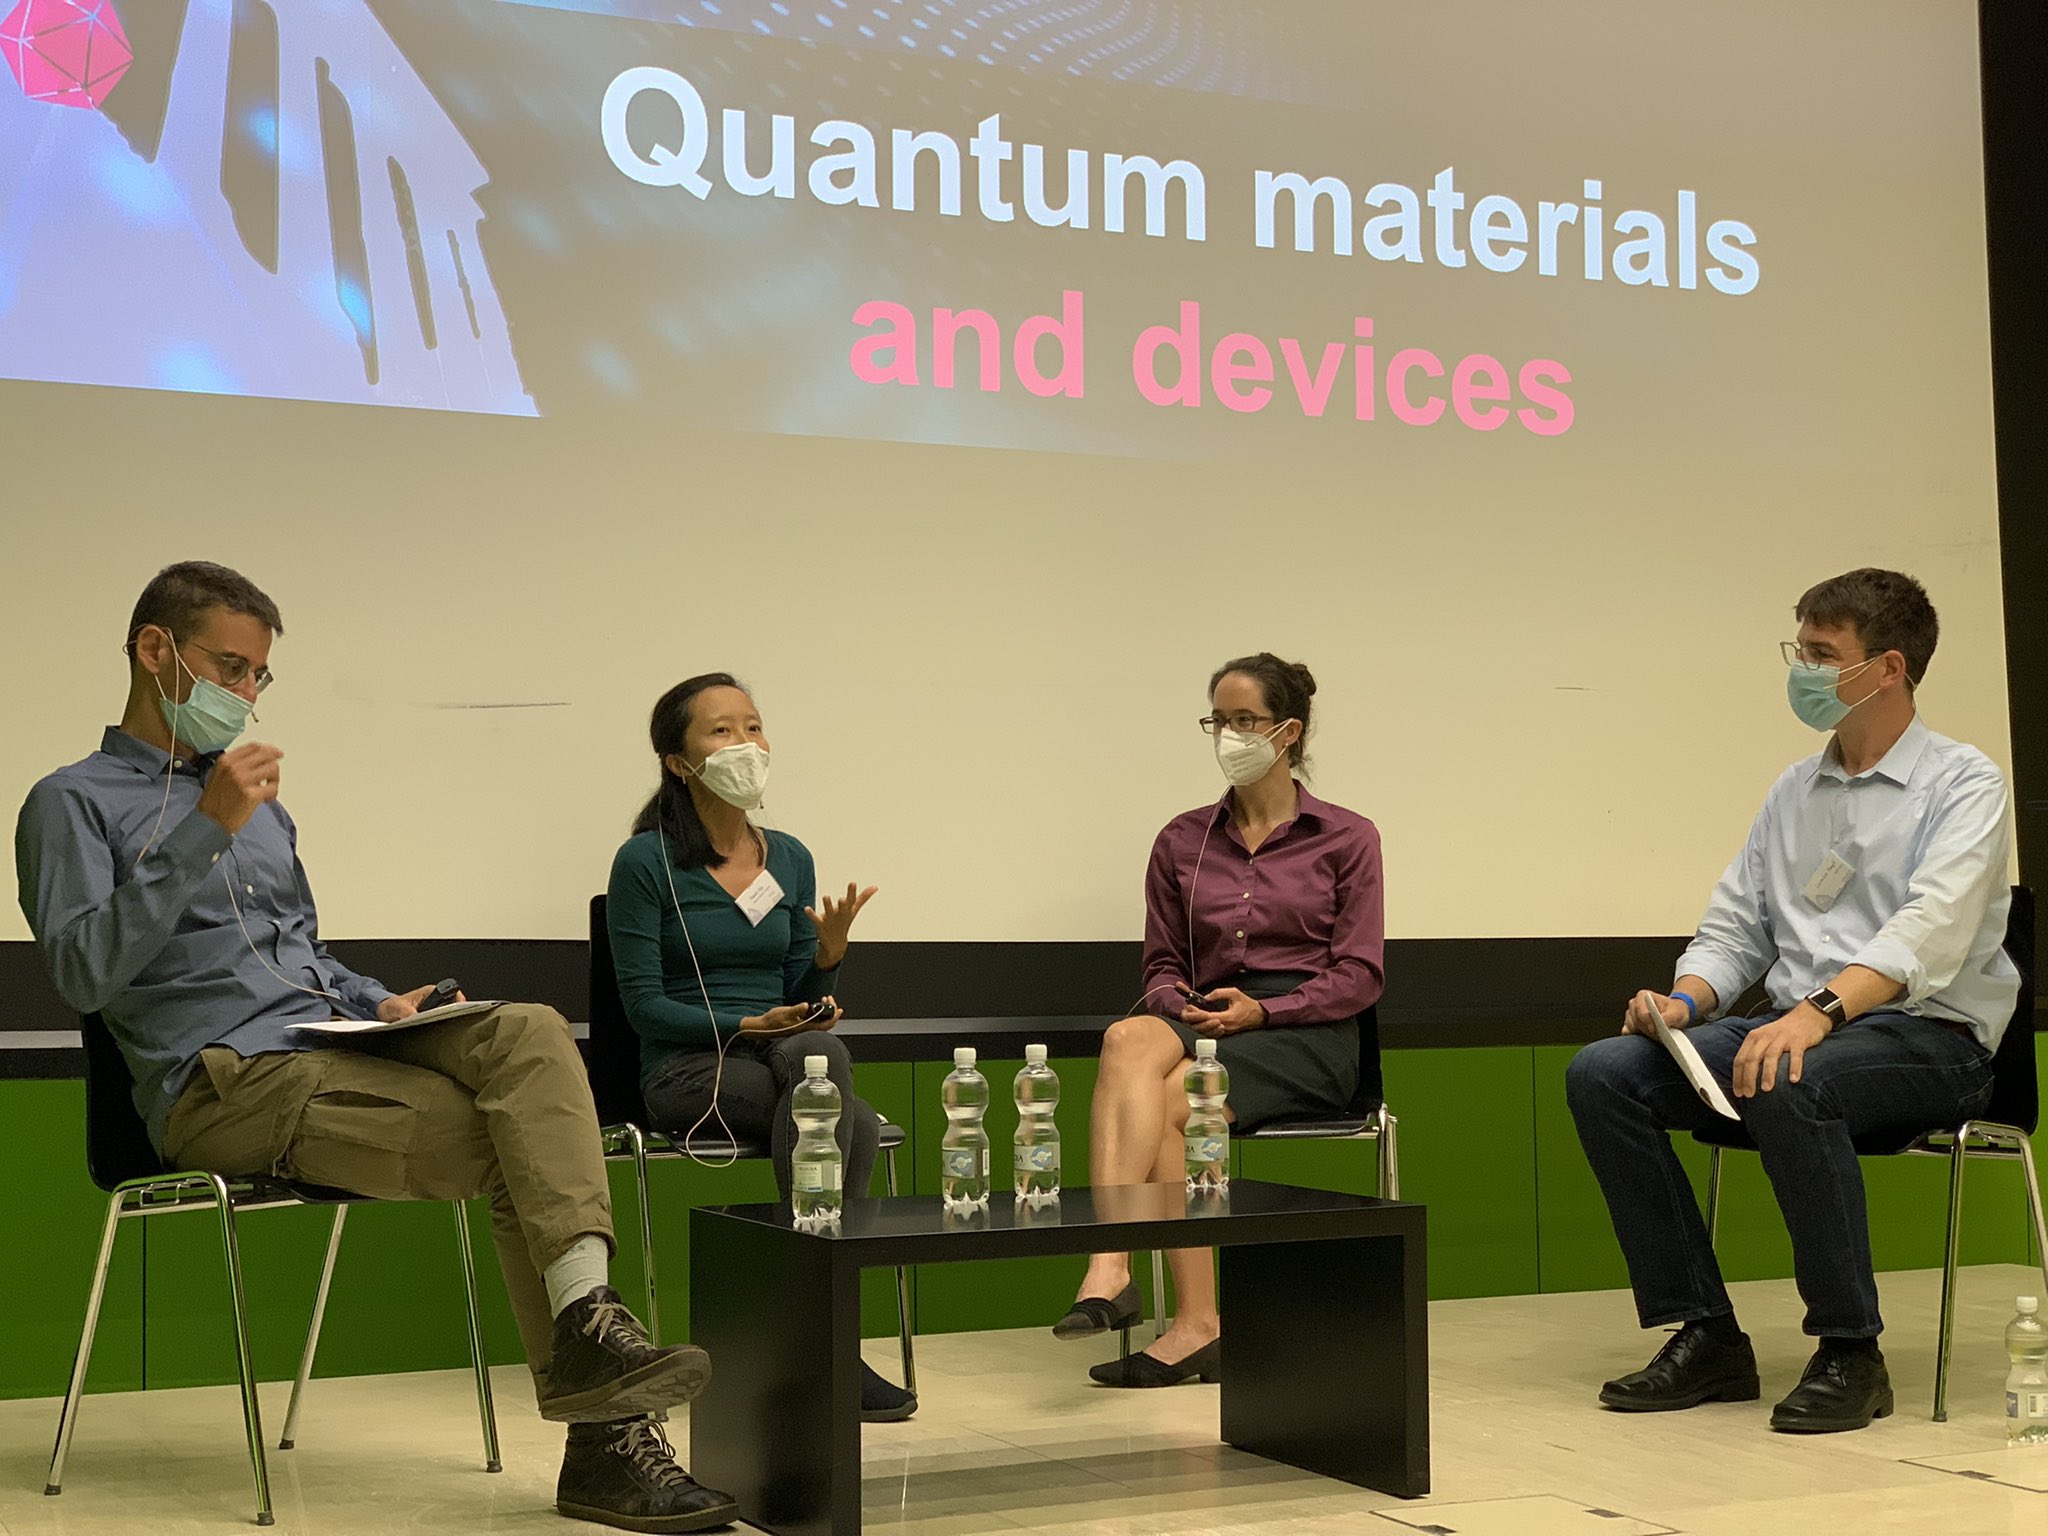 Panel discussion on q uantum materials and devices&nbsp;with Pietro Gambardella, Vanessa Wood and Yiwen Chu, moderated by Cornelius Hempel.